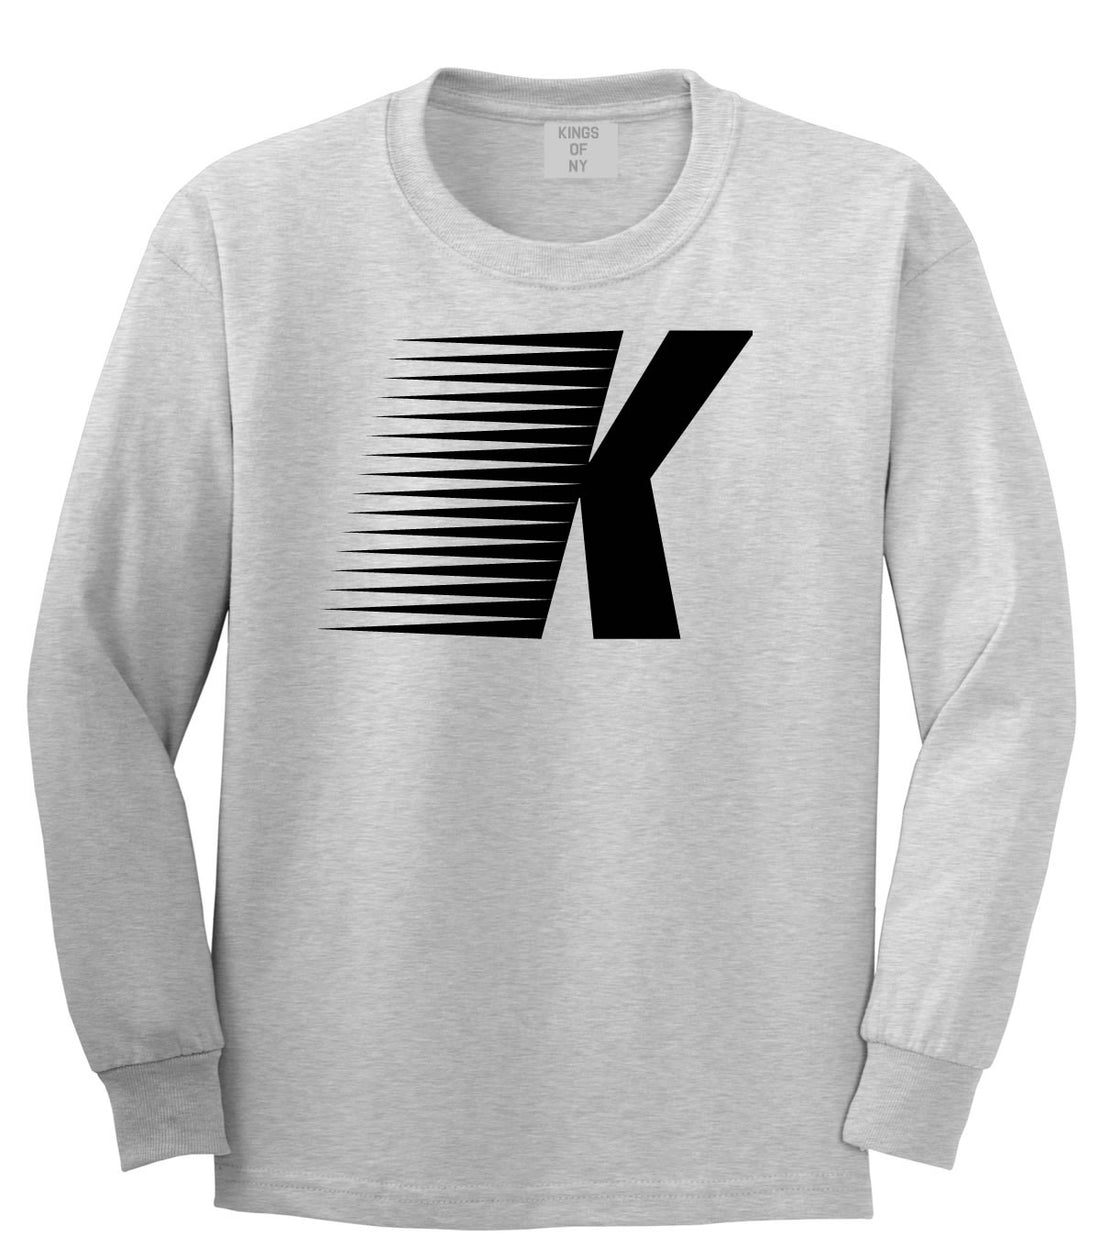 Flash K Running Fitness Style Long Sleeve T-Shirt in Grey By Kings Of NY